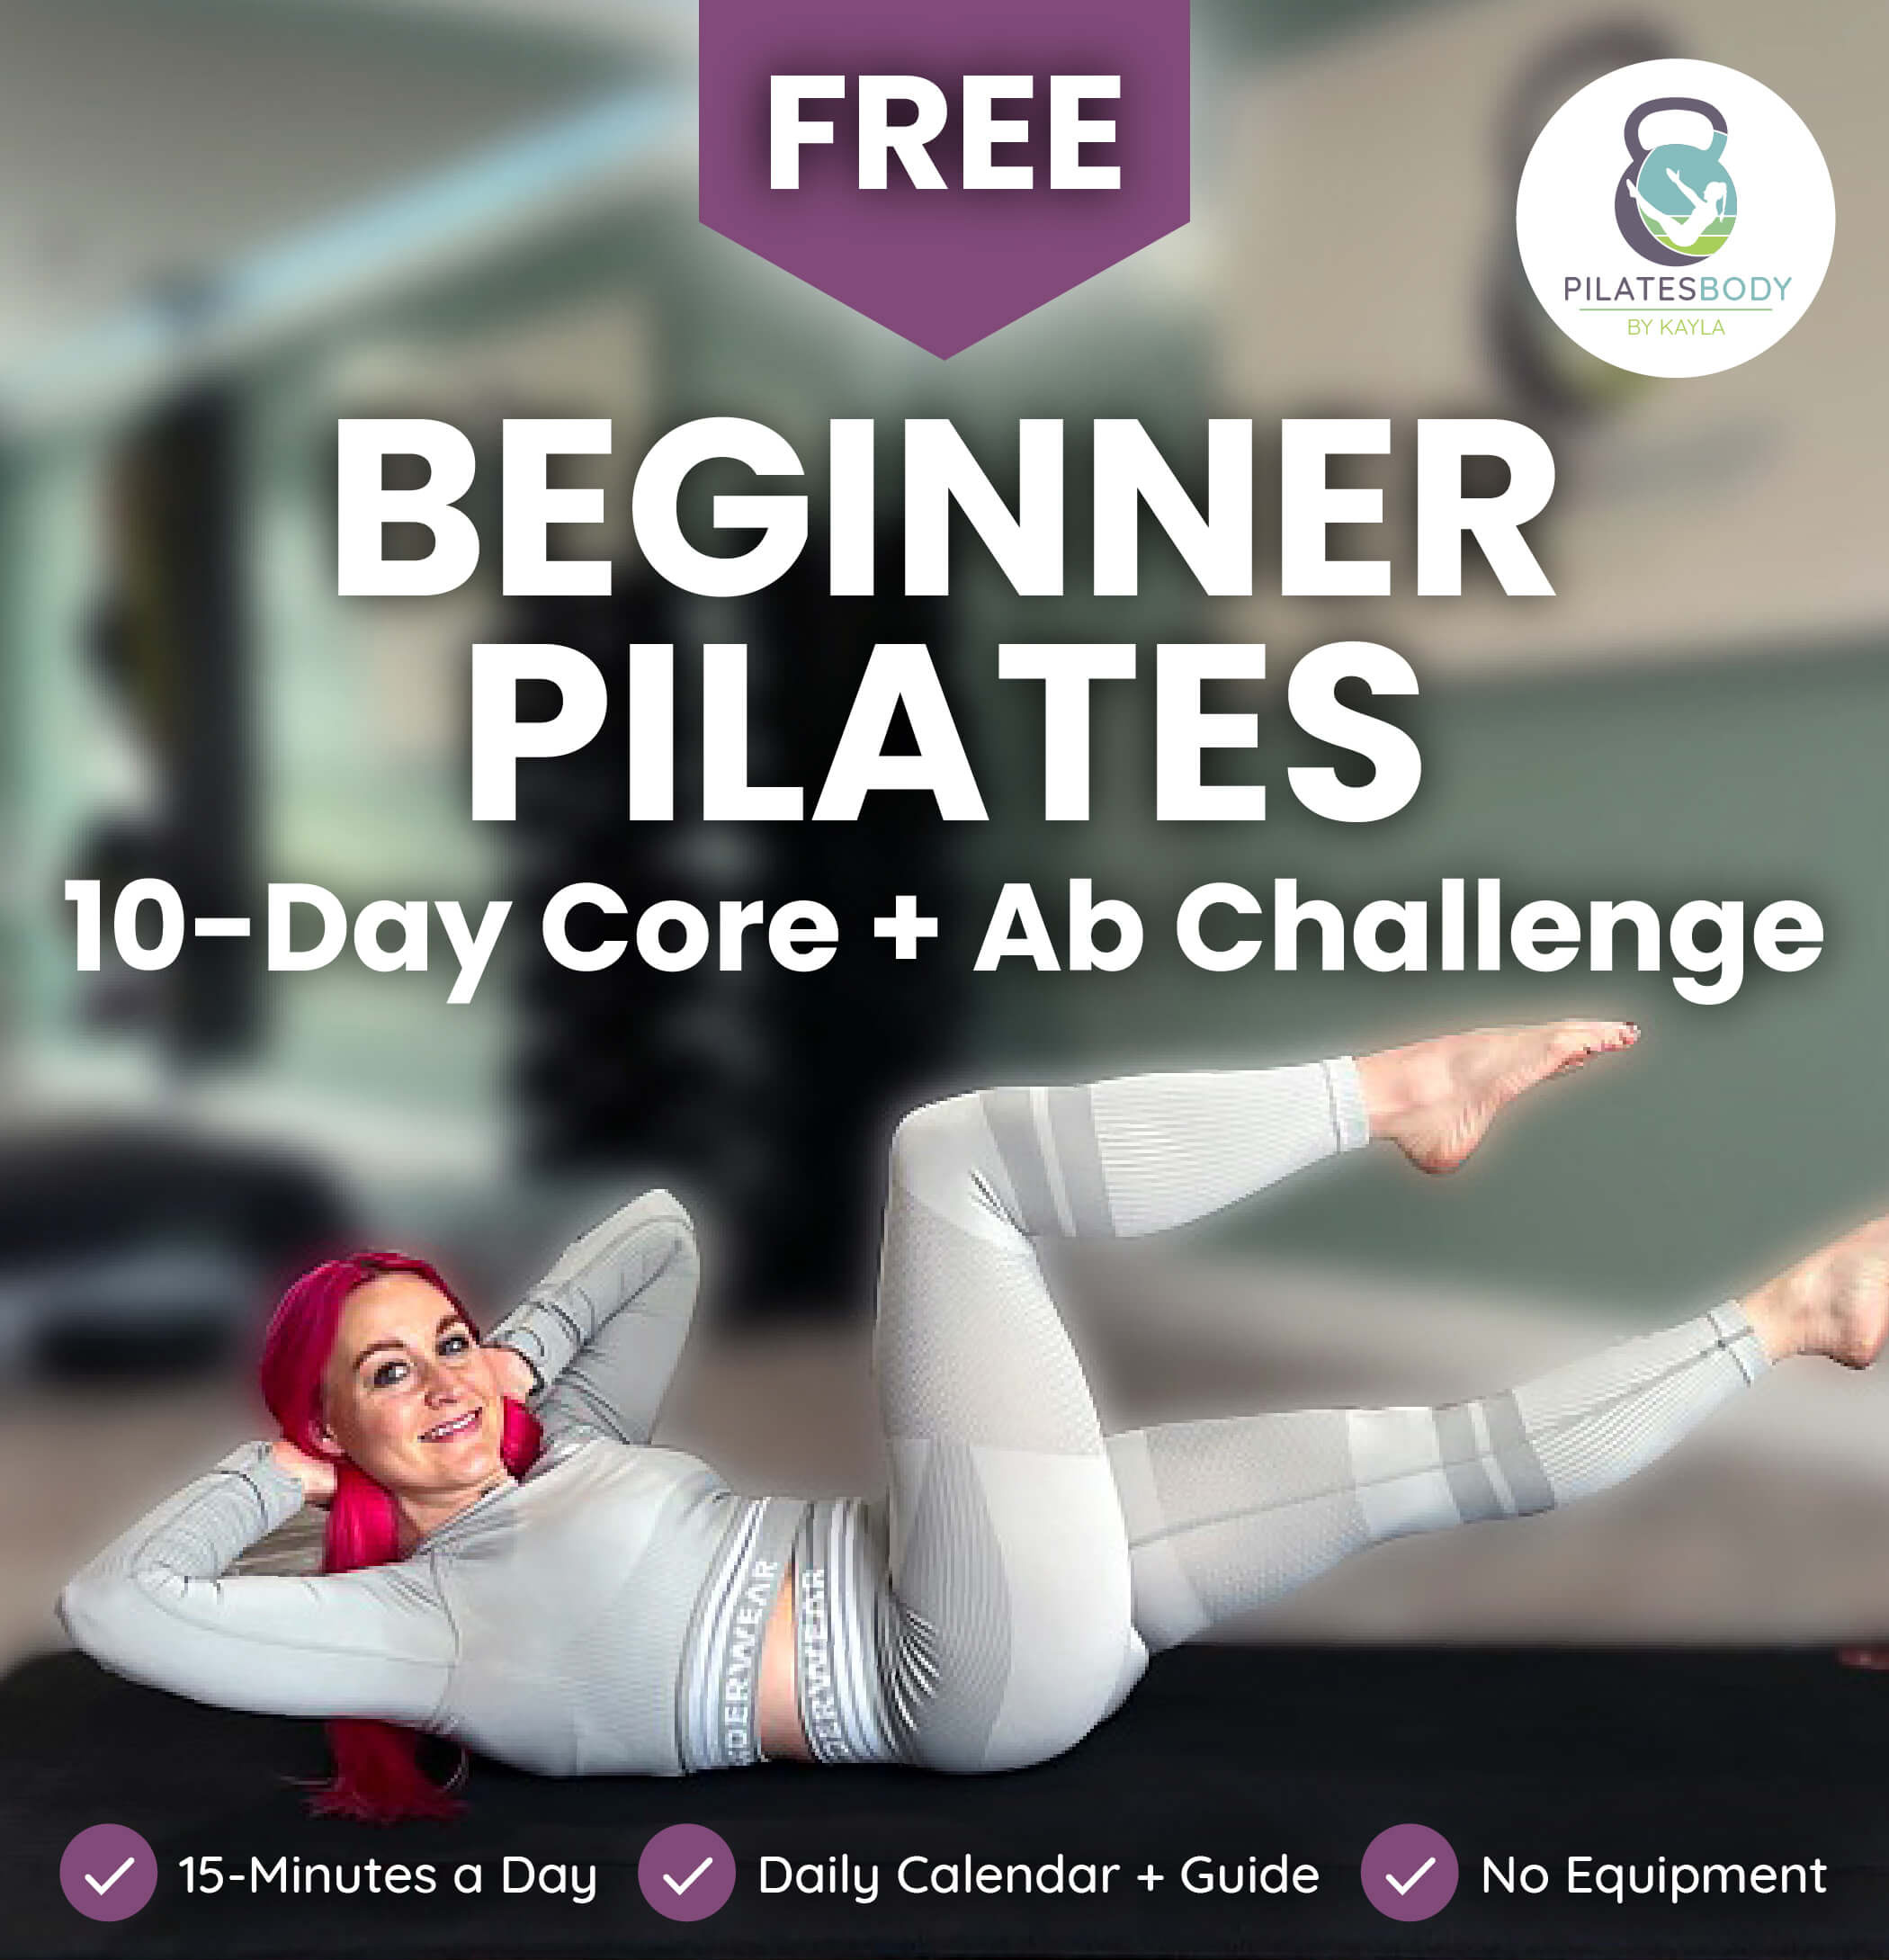 Free-Beginner-Pilates-10-Day-Core-and-Ab-Challenge-mobile